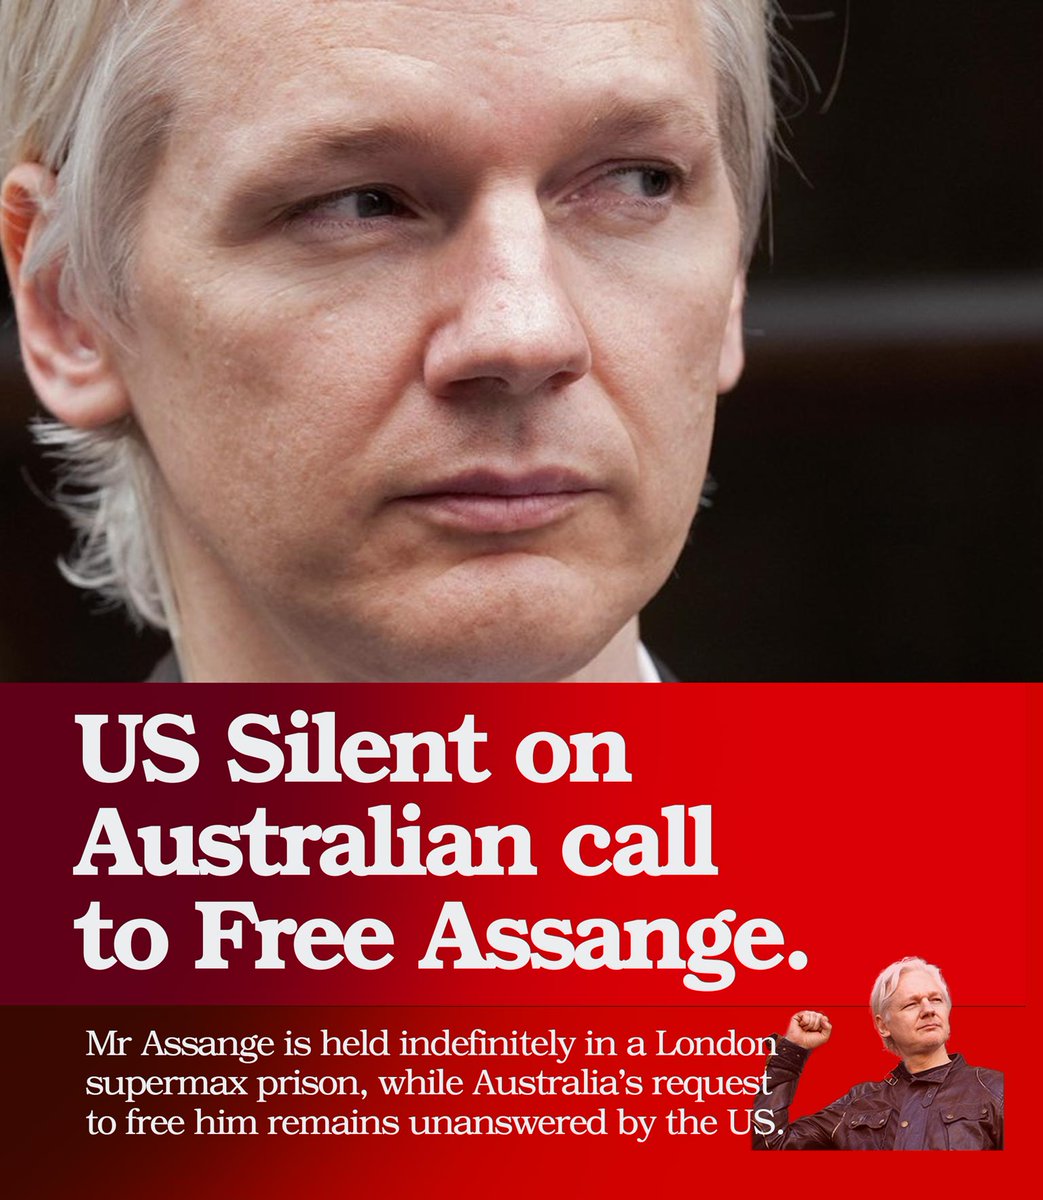 The Australian call to release Mr Assange and end the US persecution remains unanswered. Mr Assange has been held in supermax prison solitary confinement conditions for 5 years. Humanitarian agencies, World Media Organisations & World Governments have condemned the US witch-hunt.